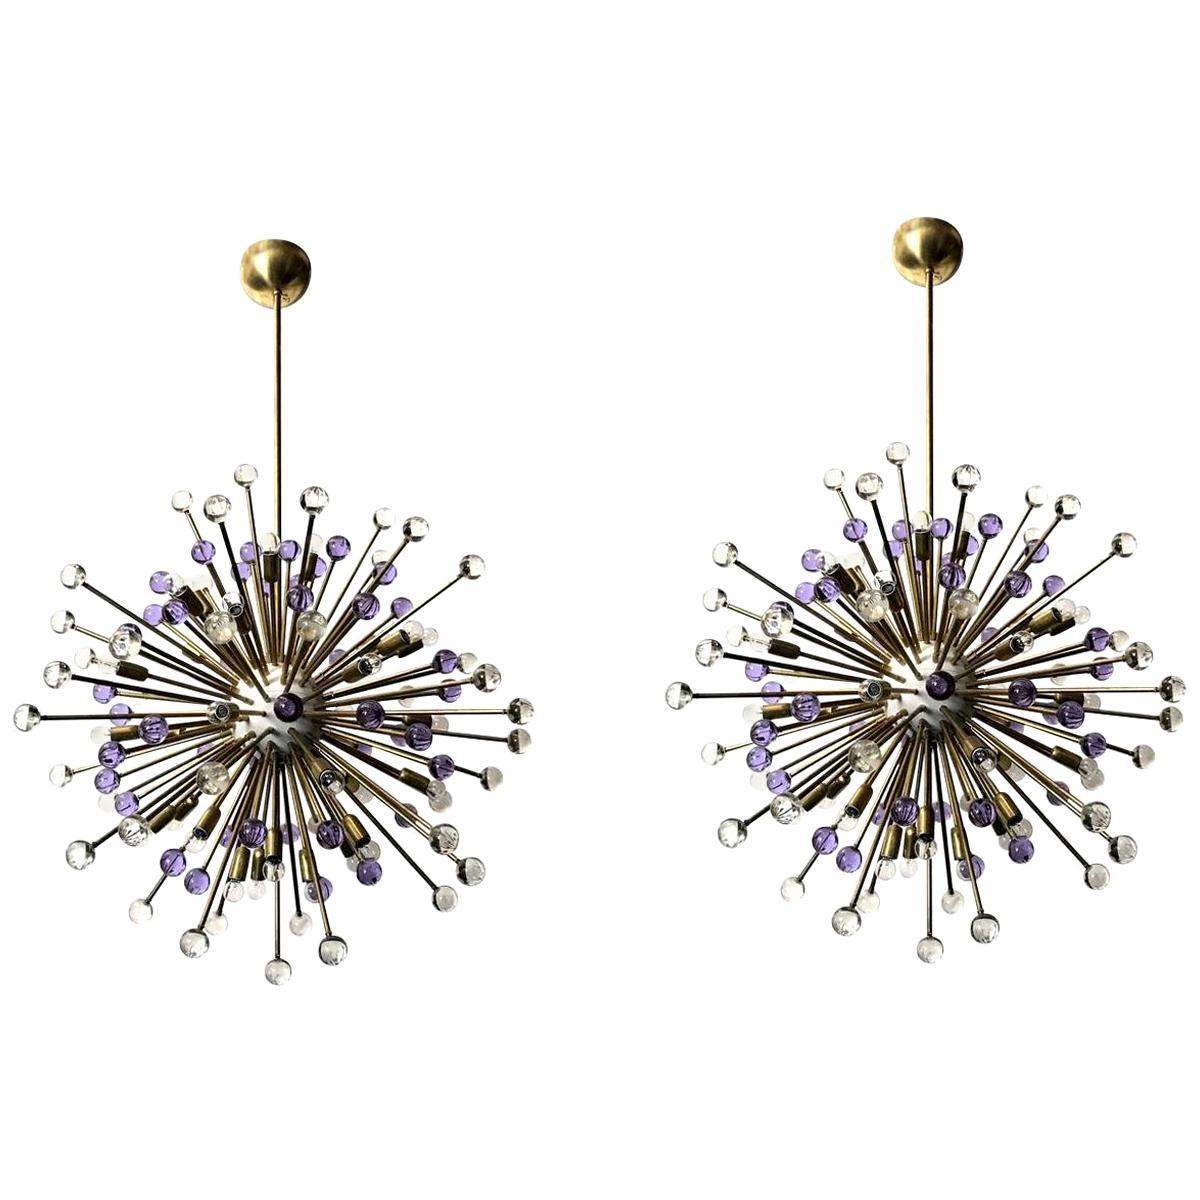 Pair of Italian Sputnik Chandeliers with Clear and Purple Murano Glass, 1990s